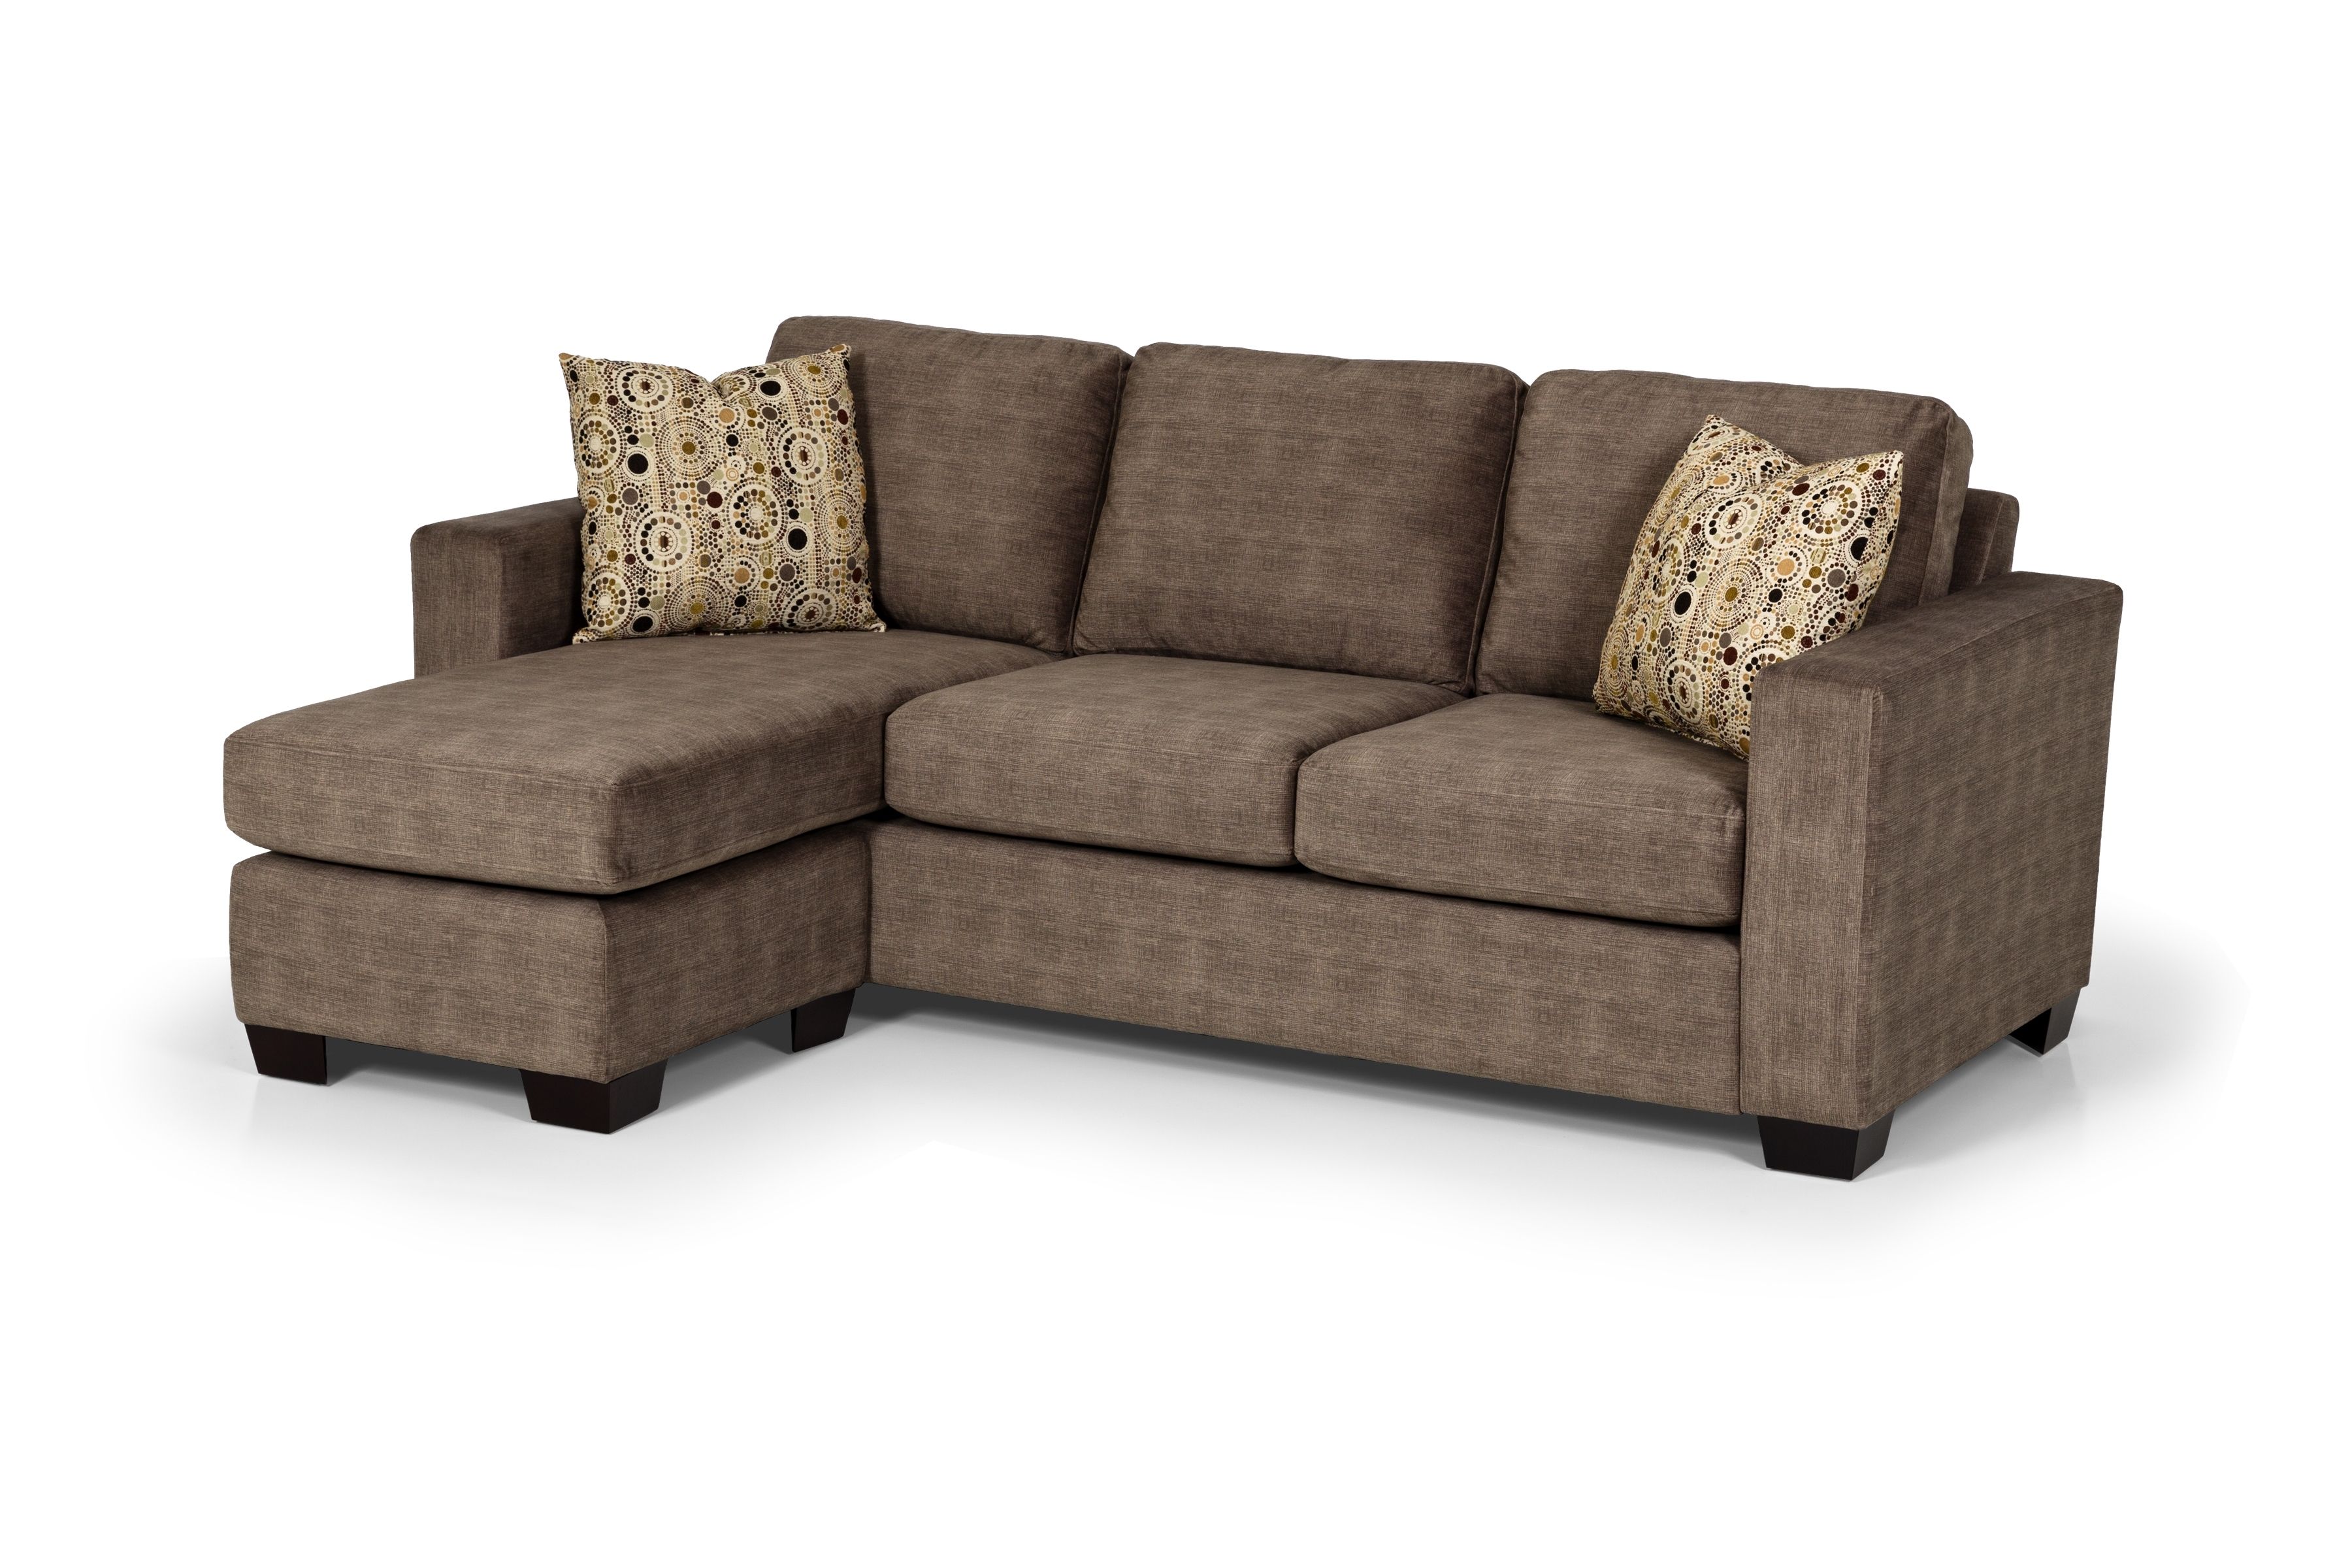 2017 Sectional Sofa Design: Cheap Sectional Sofas Furniture Design Throughout Sectional Sofas In Stock (View 6 of 15)